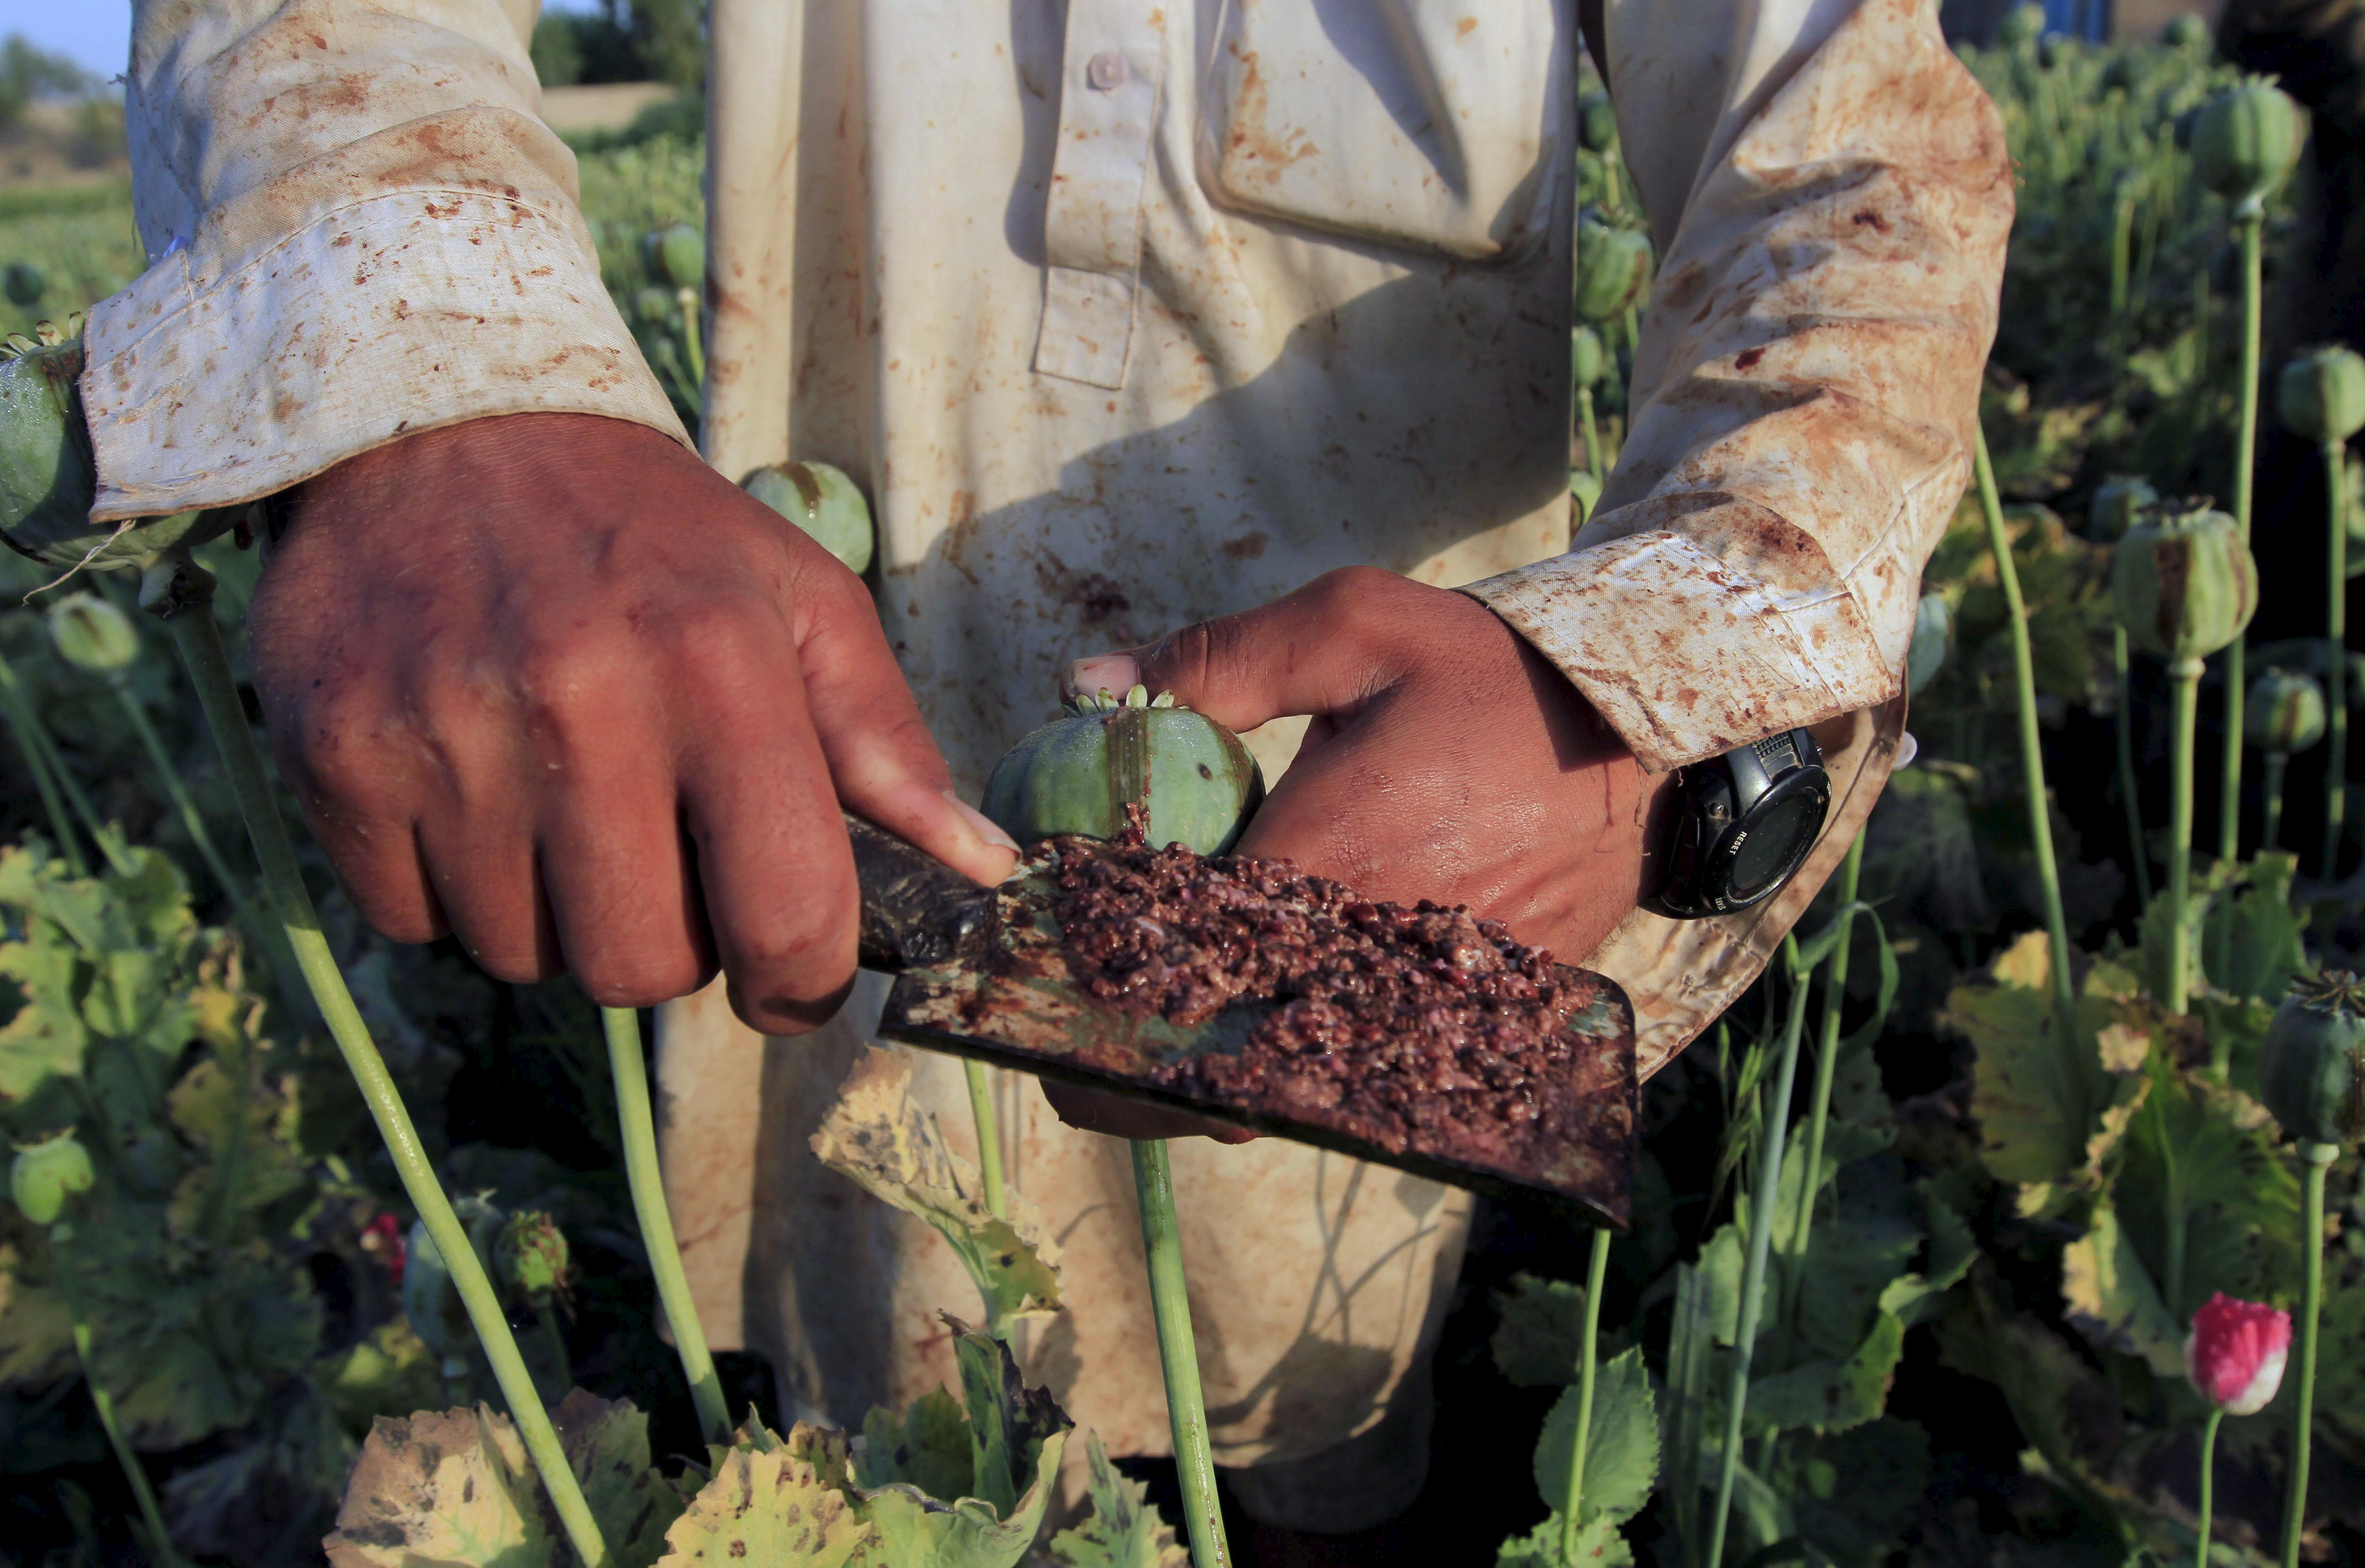 Raw opium from a poppy head is seen at a poppy farmer's field on the outskirts of Jalalabad,